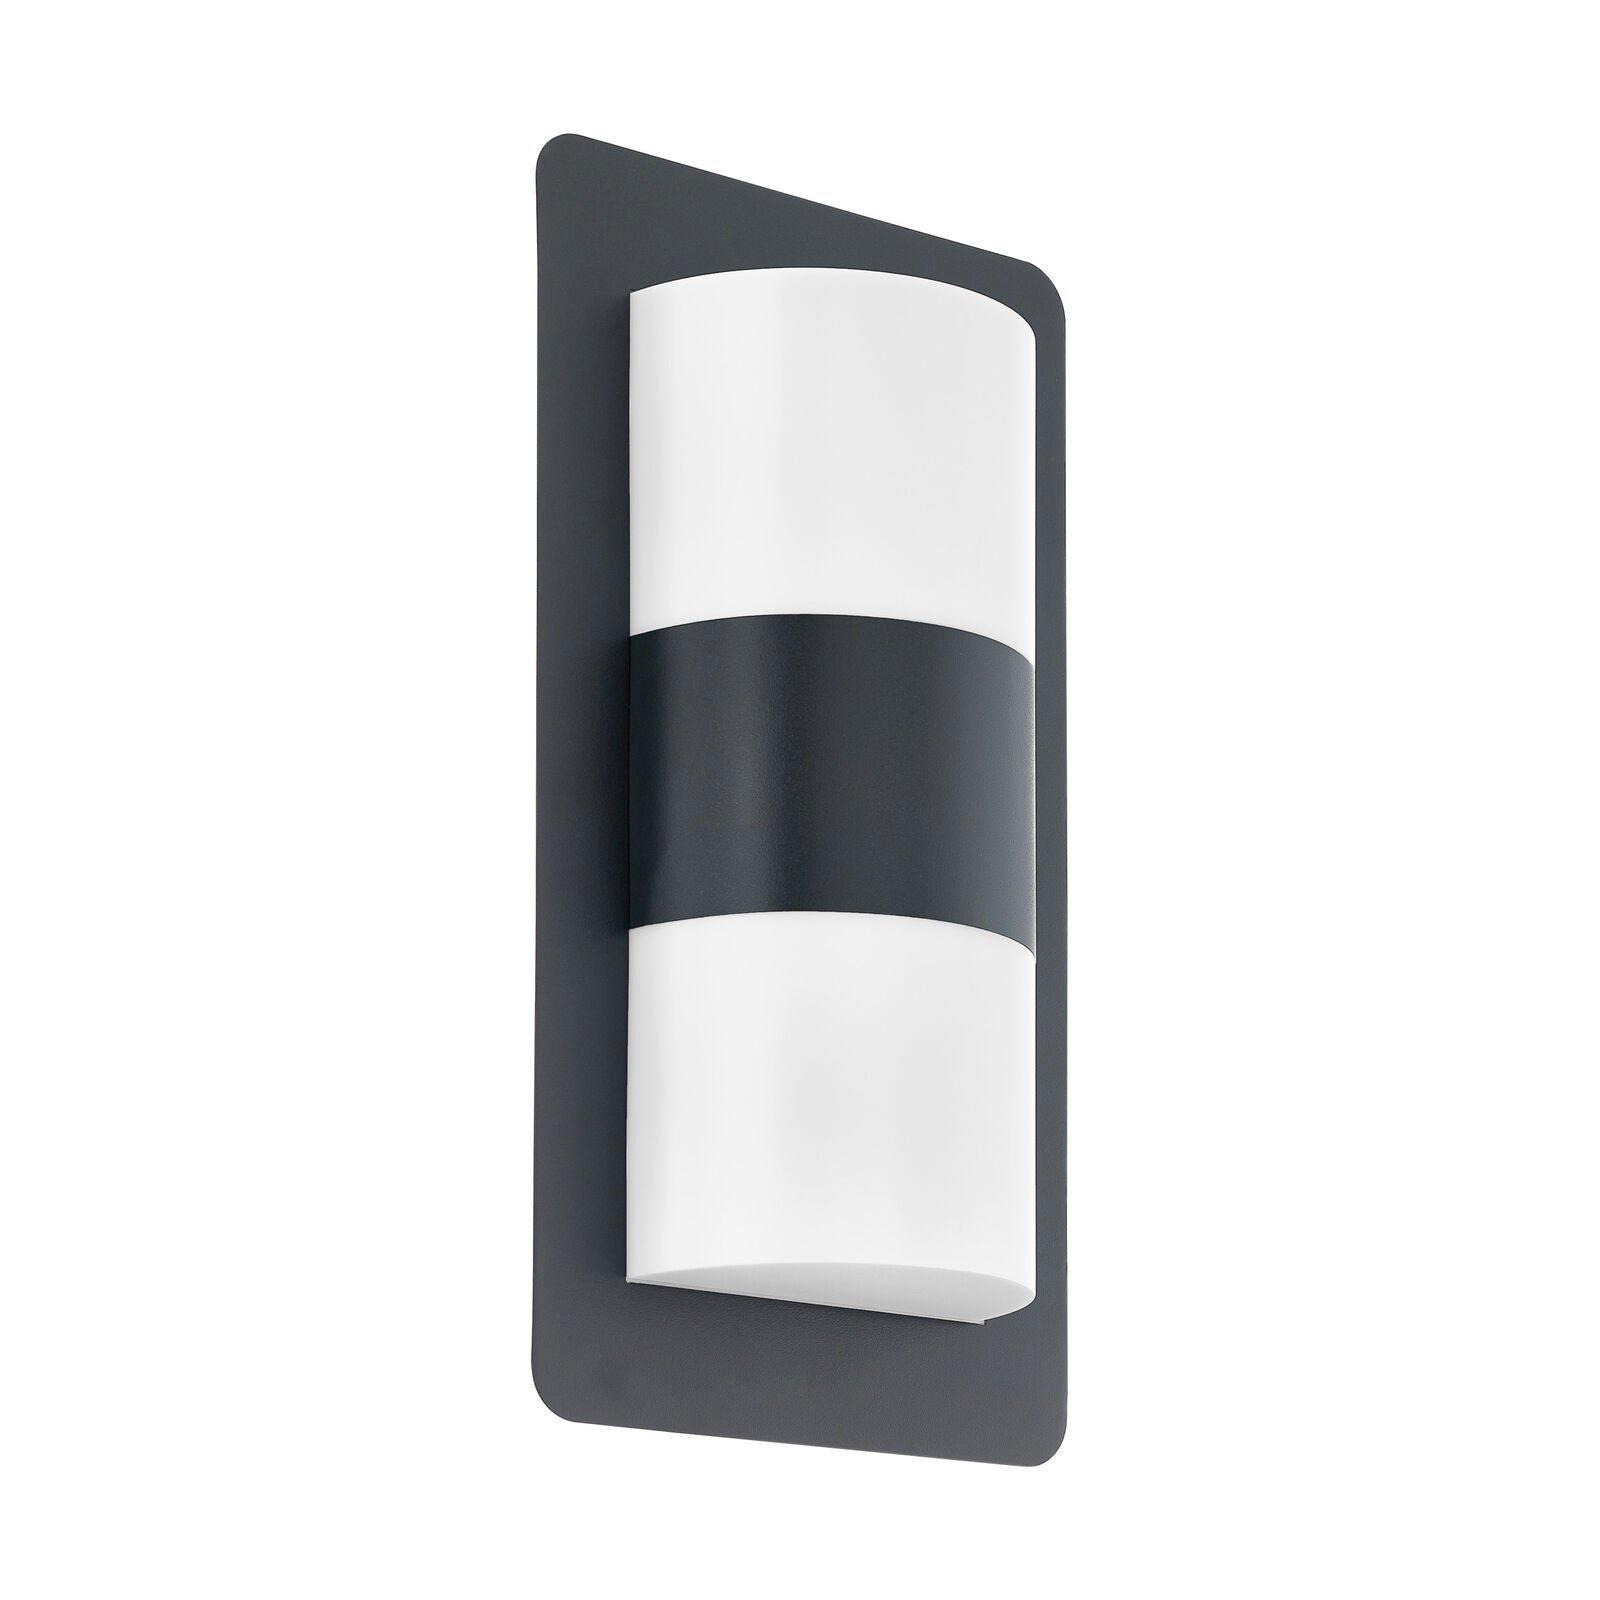 IP44 Outdoor Wall Light Anthracite Zinc Plated Steel 2 x 10W E27 Bulb